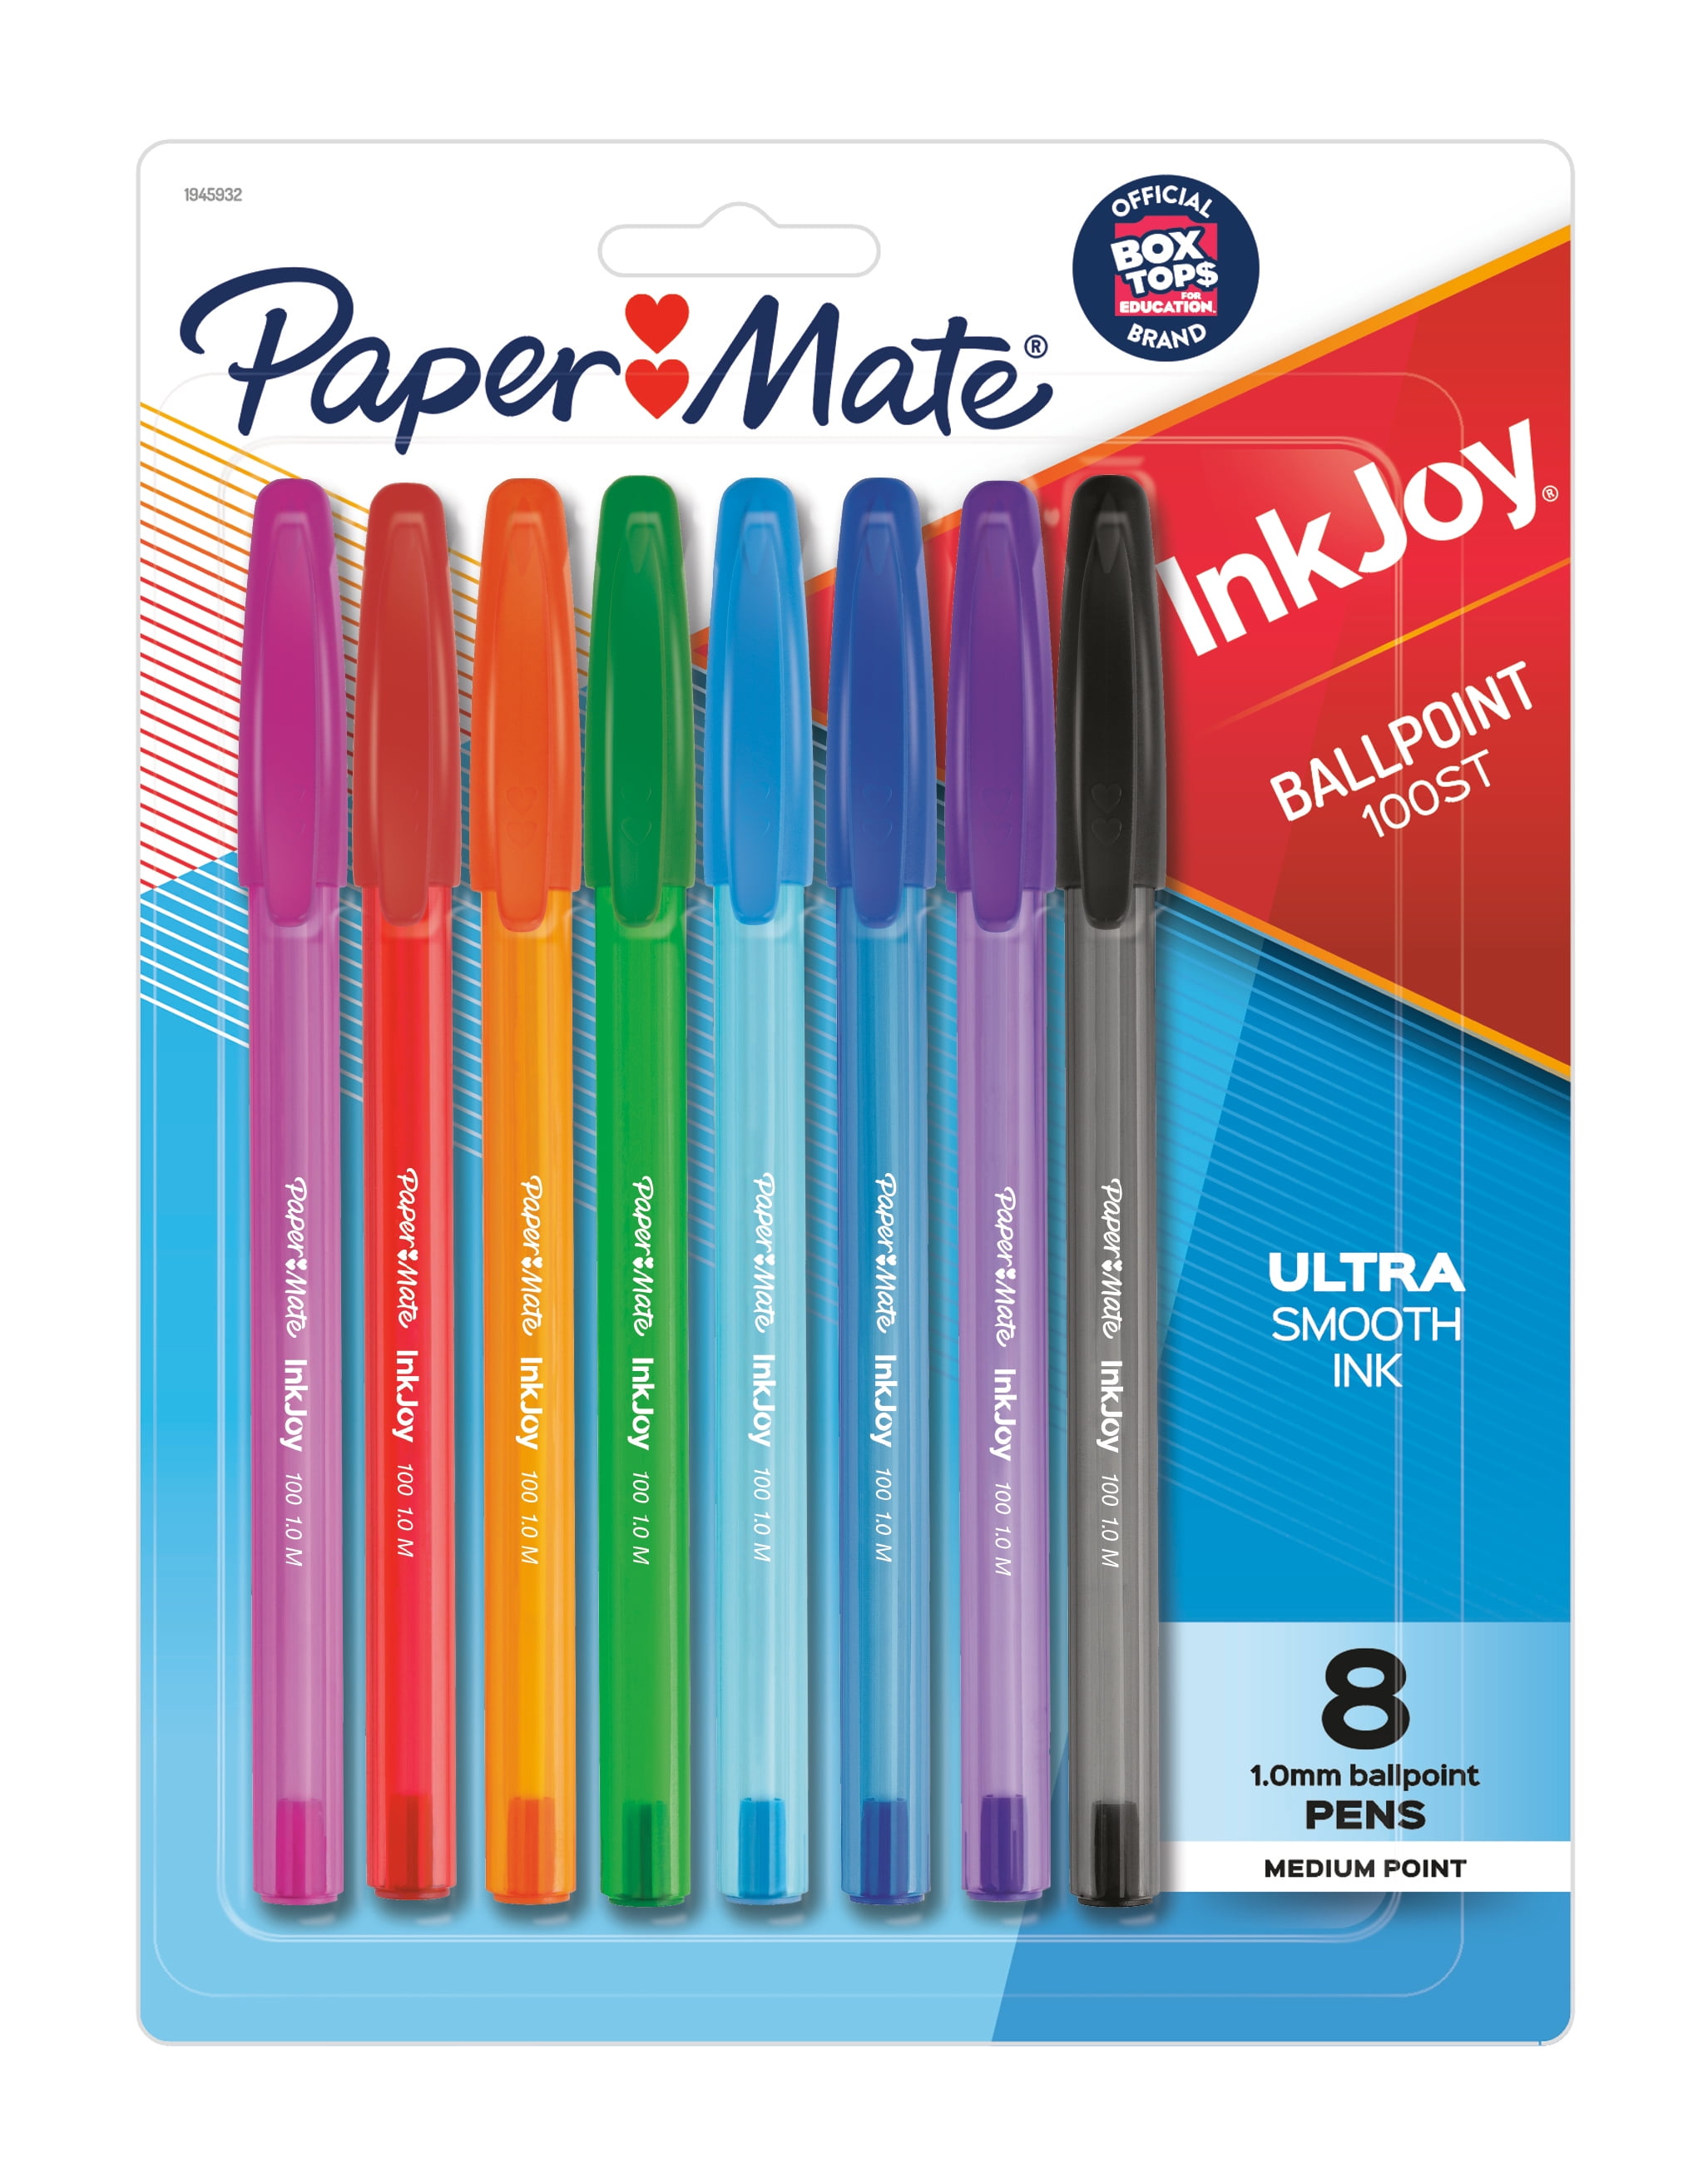 Paper Mate InkJoy Pens, M (1.0 mm), Assorted Inks - 8 pens